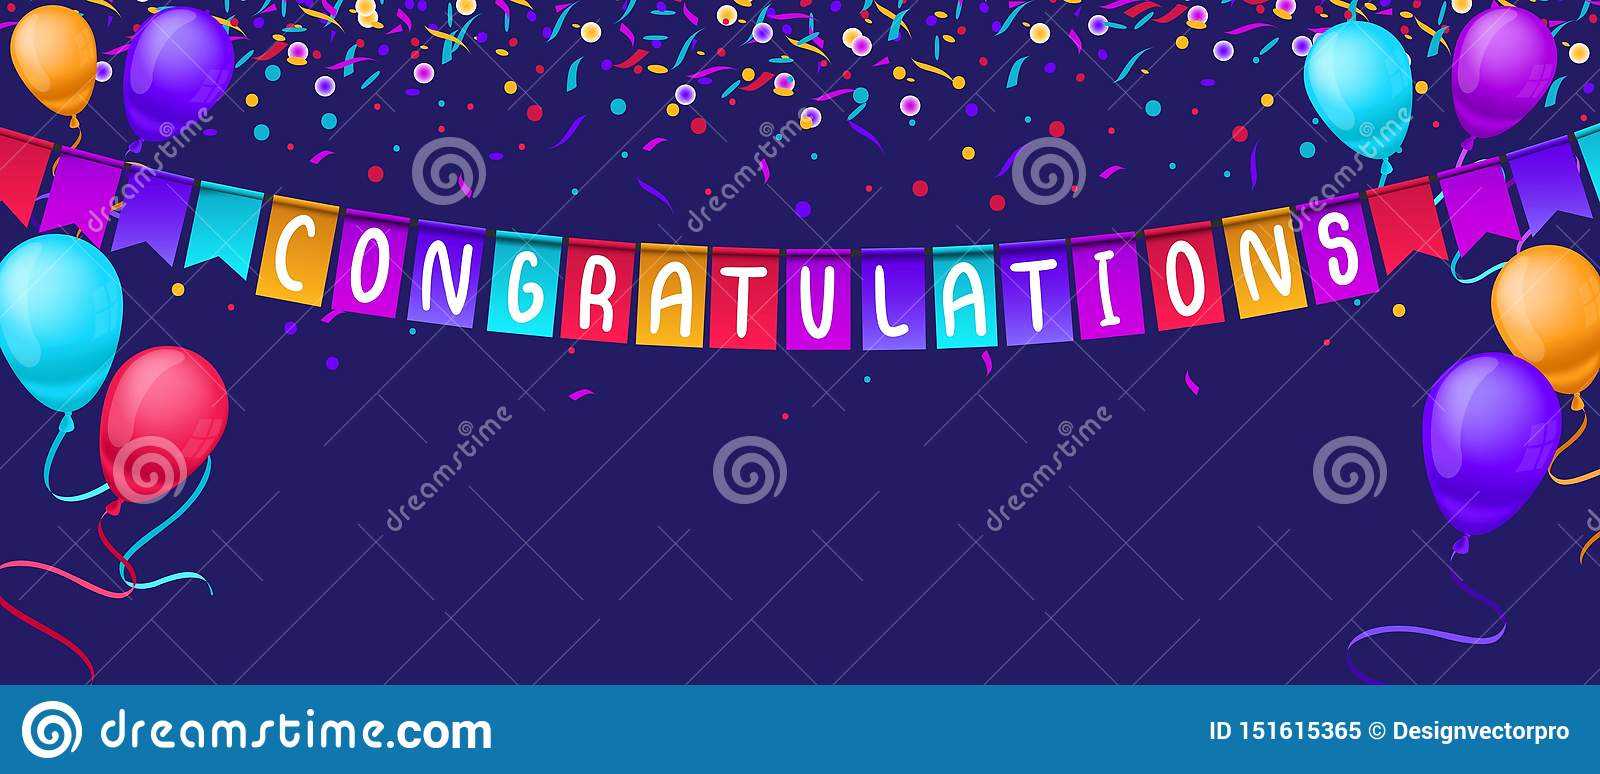 Congratulations Banner Template With Balloons And Confetti Intended For Congratulations Banner Template